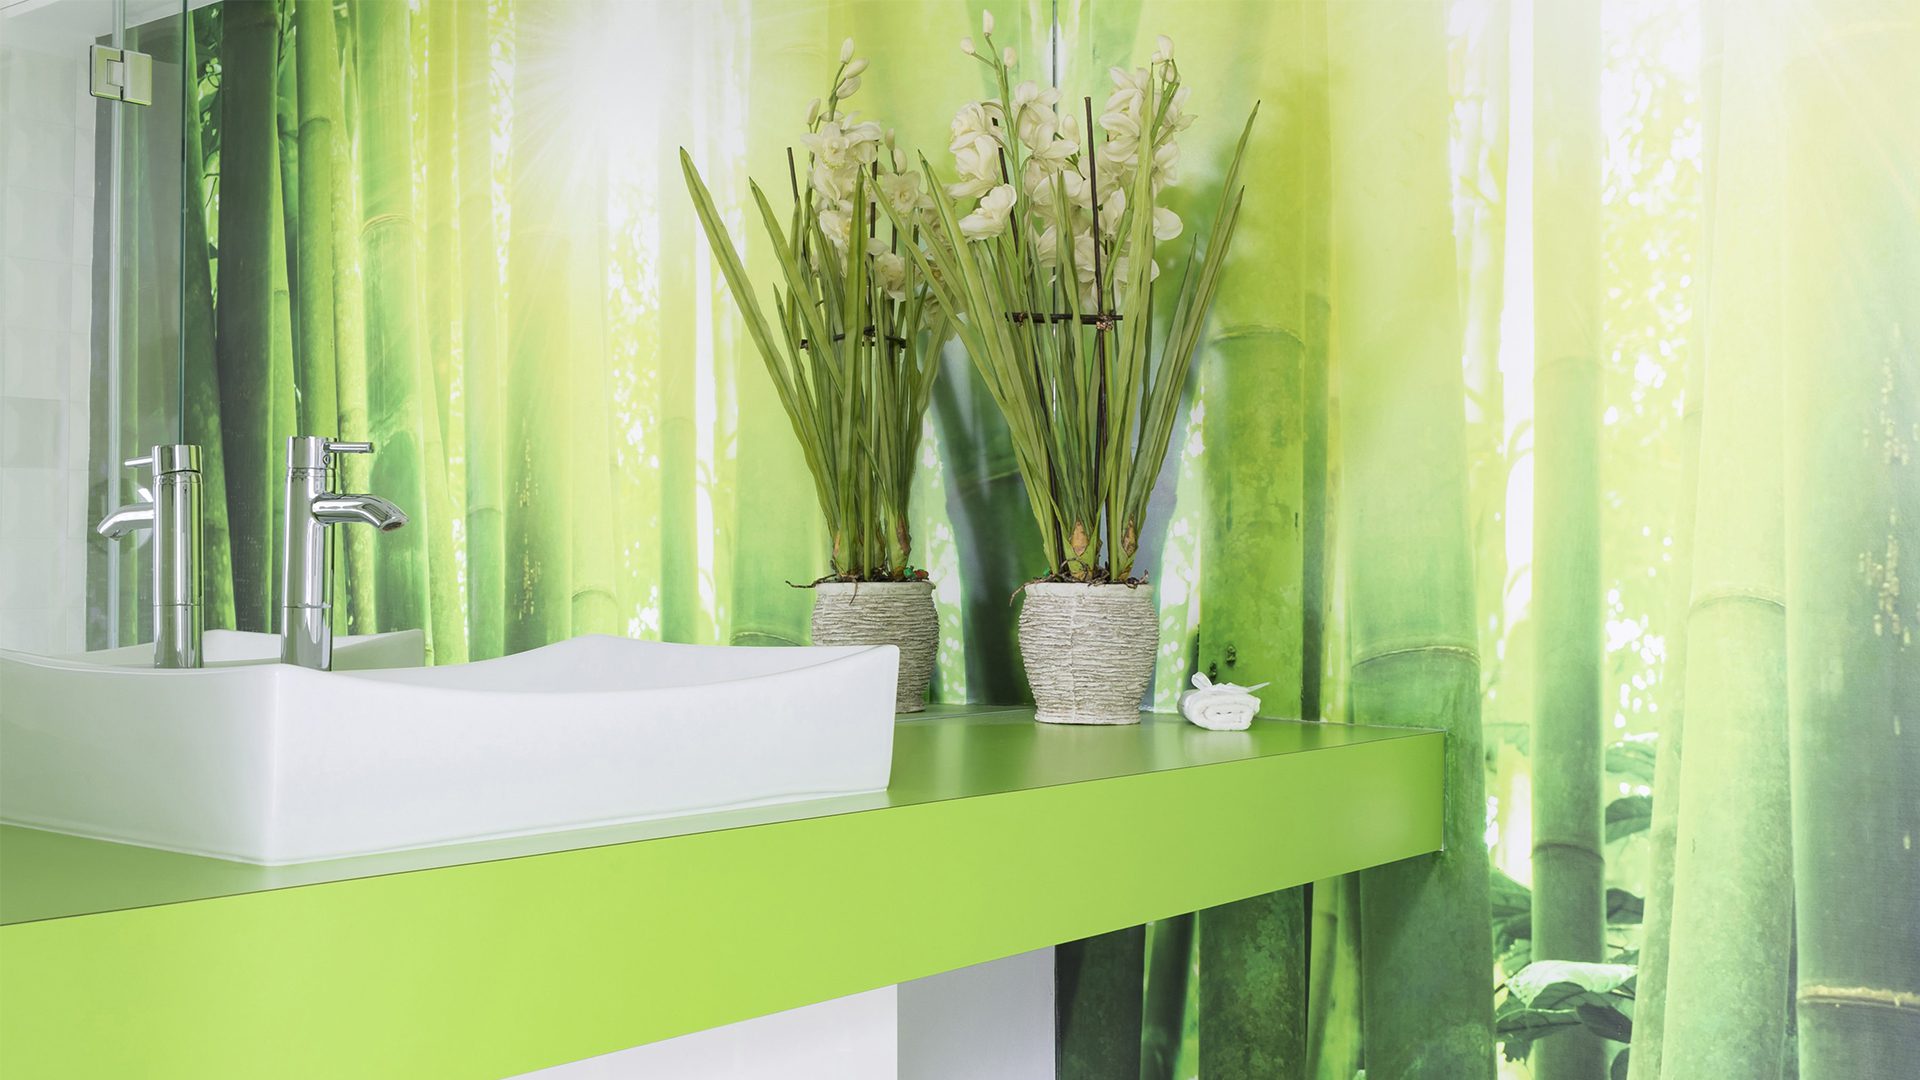 Full wall printed glass splashback with image of green bamboo